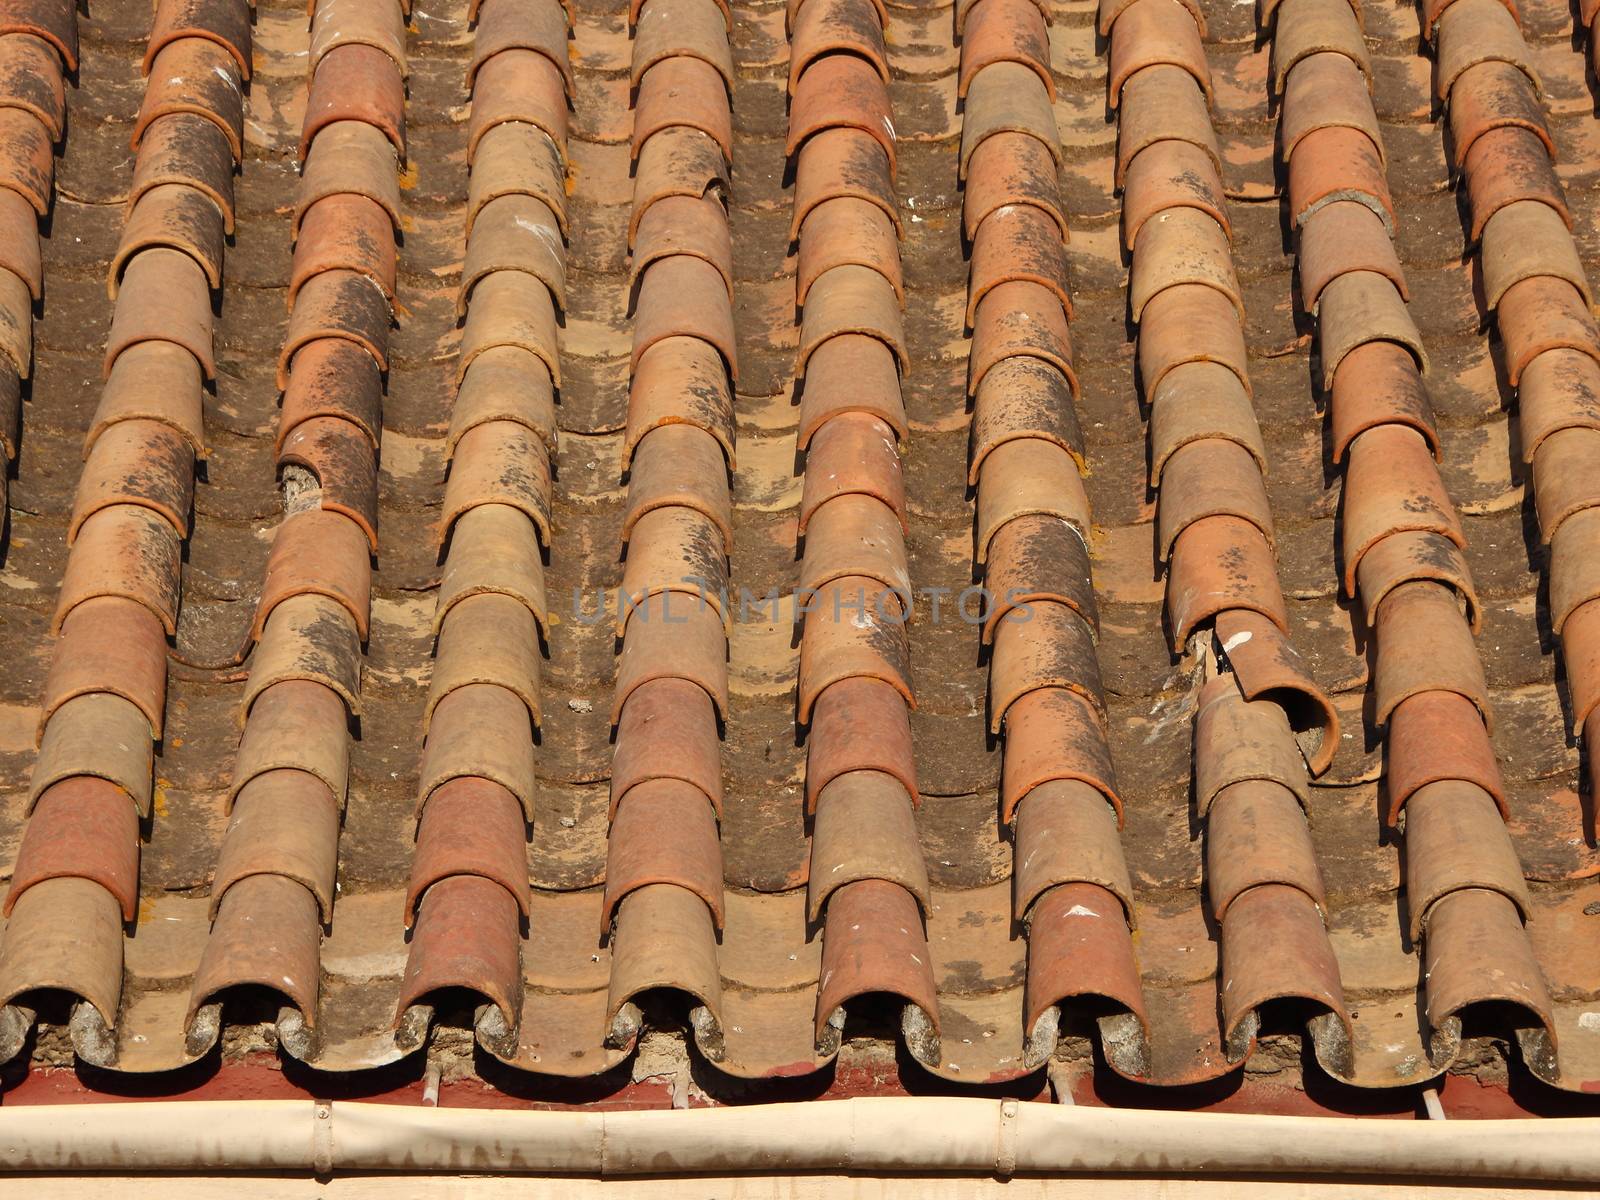 Old Tile Brick Roof with Gutter in Warm Colors